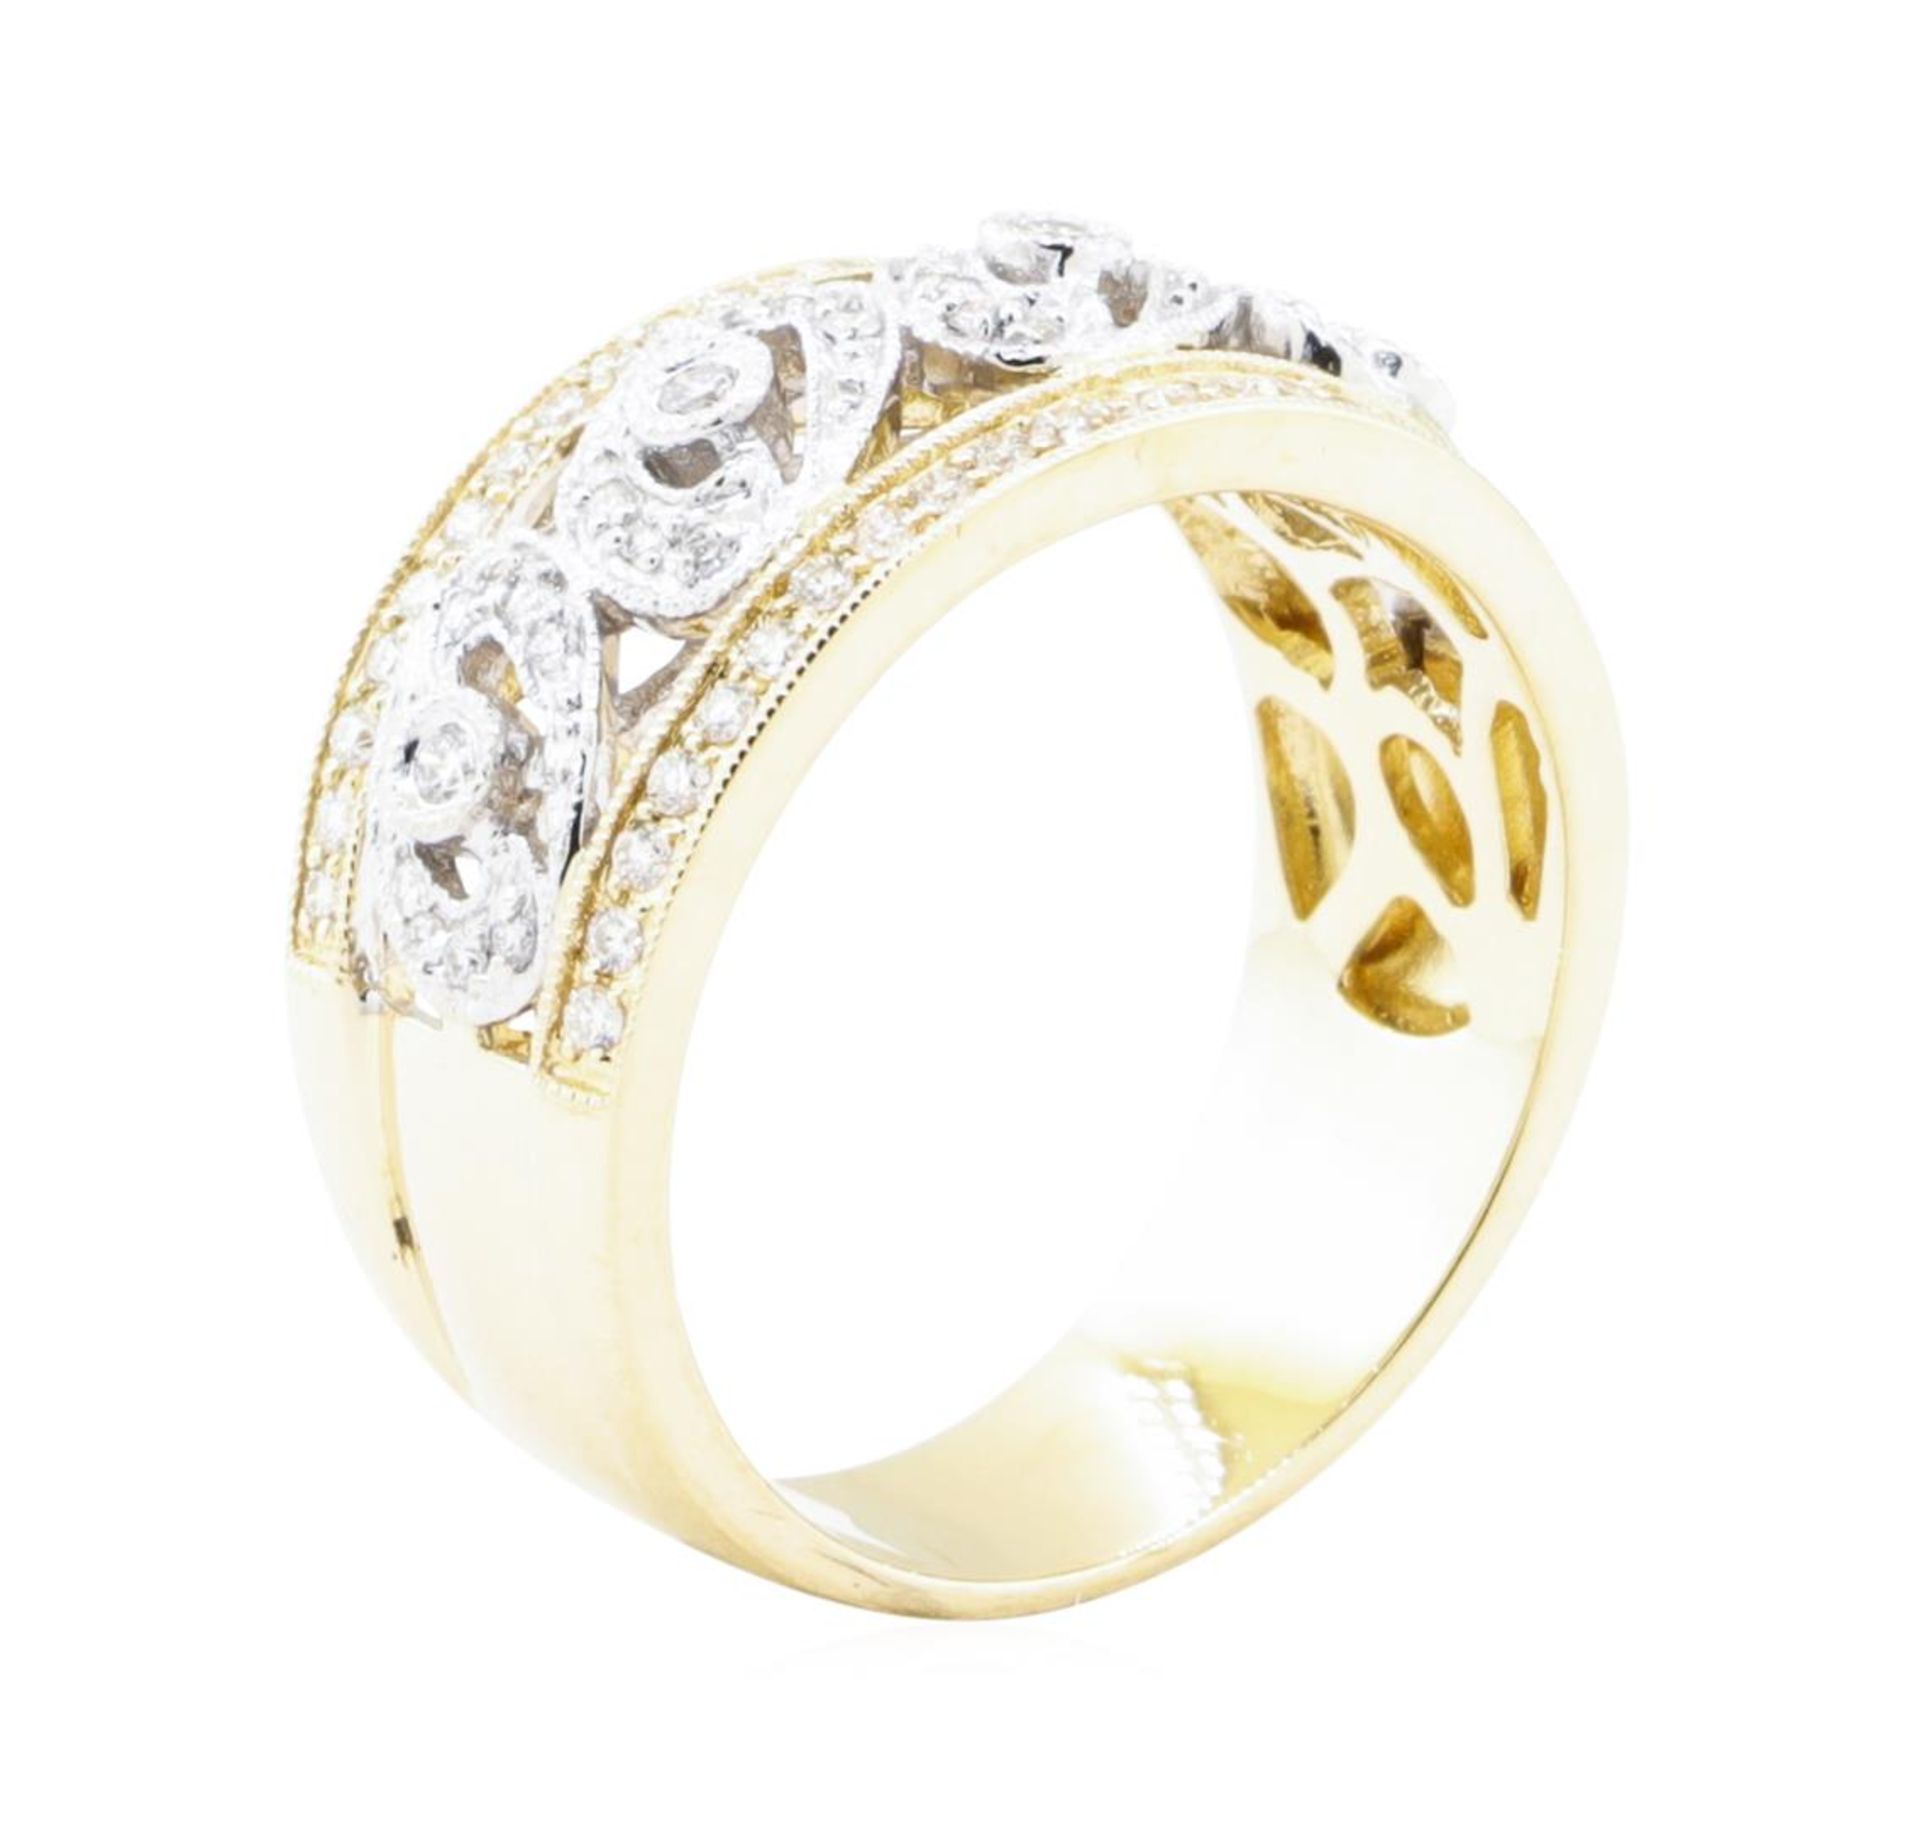 0.52 ctw Diamond Wide Band - 14KT Yellow And White Gold - Image 4 of 5